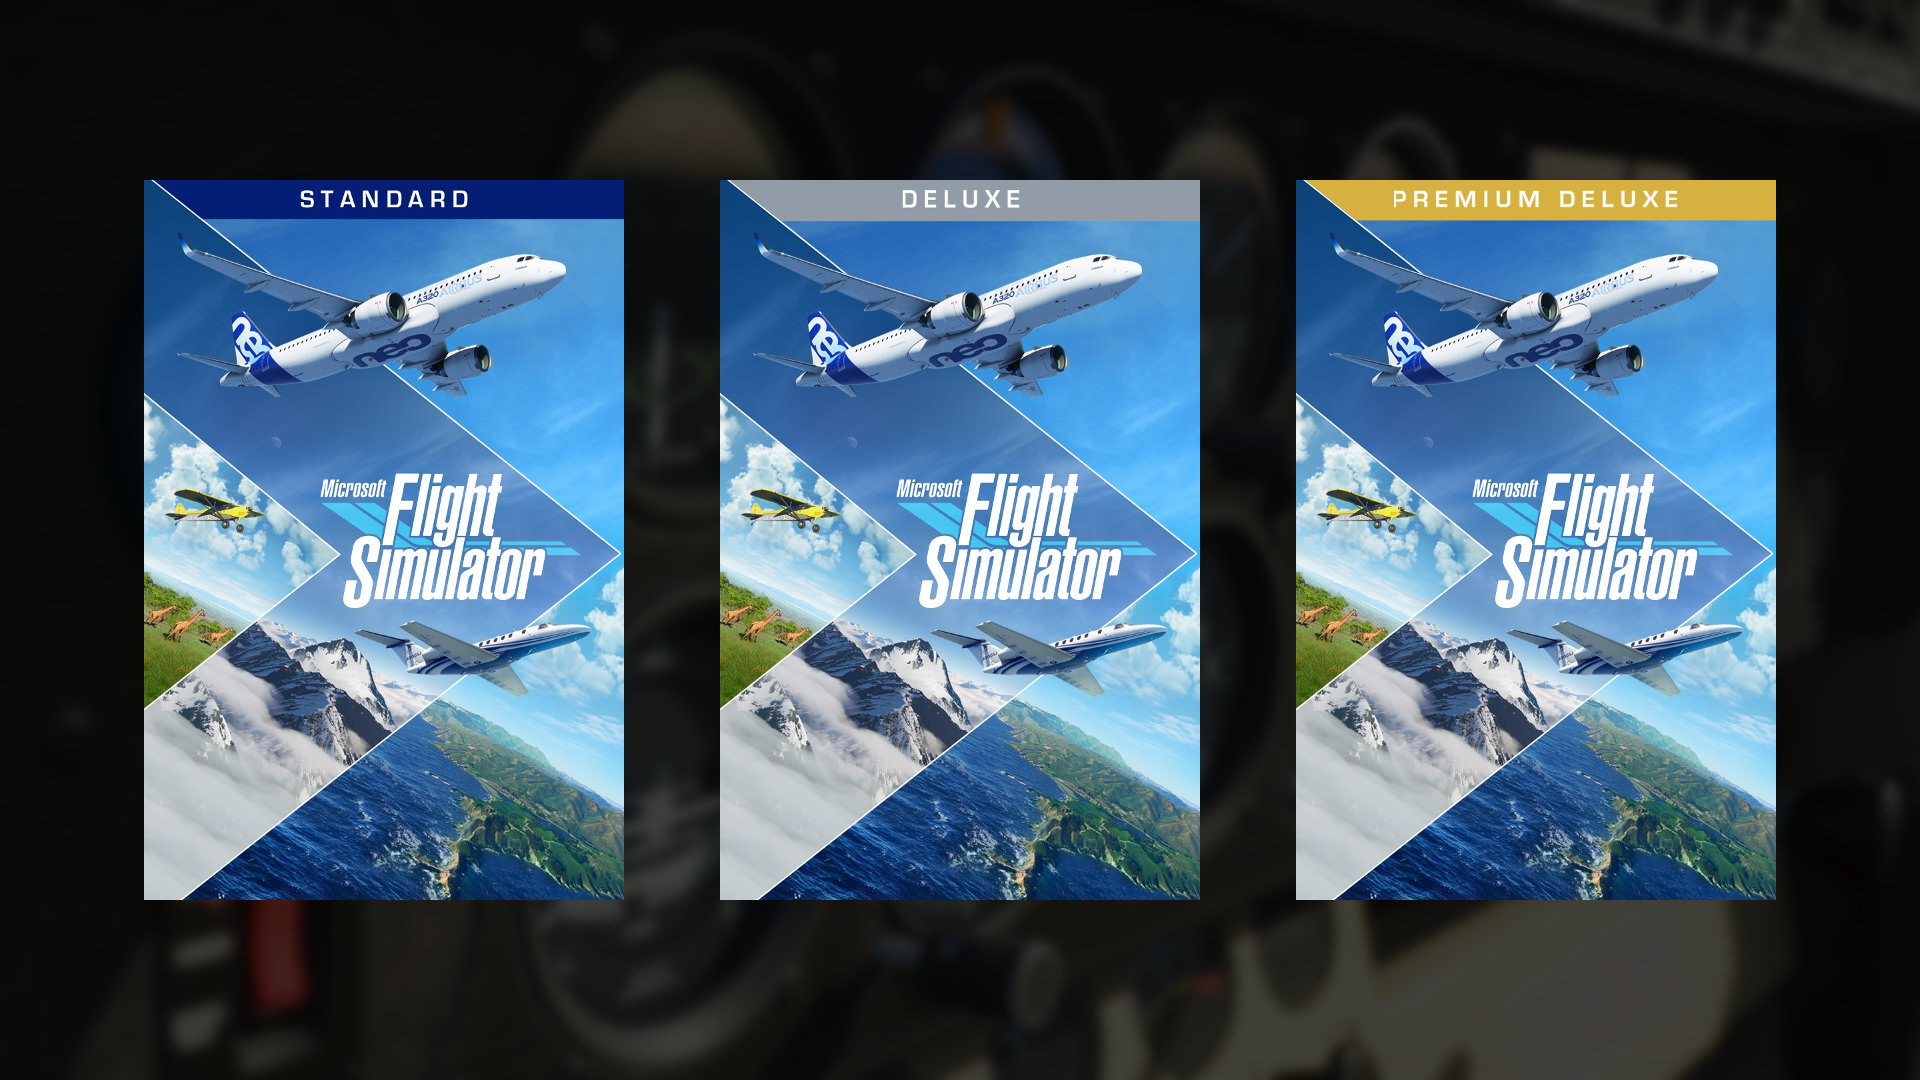 You don't need the Premium Deluxe Edition of Microsoft Flight